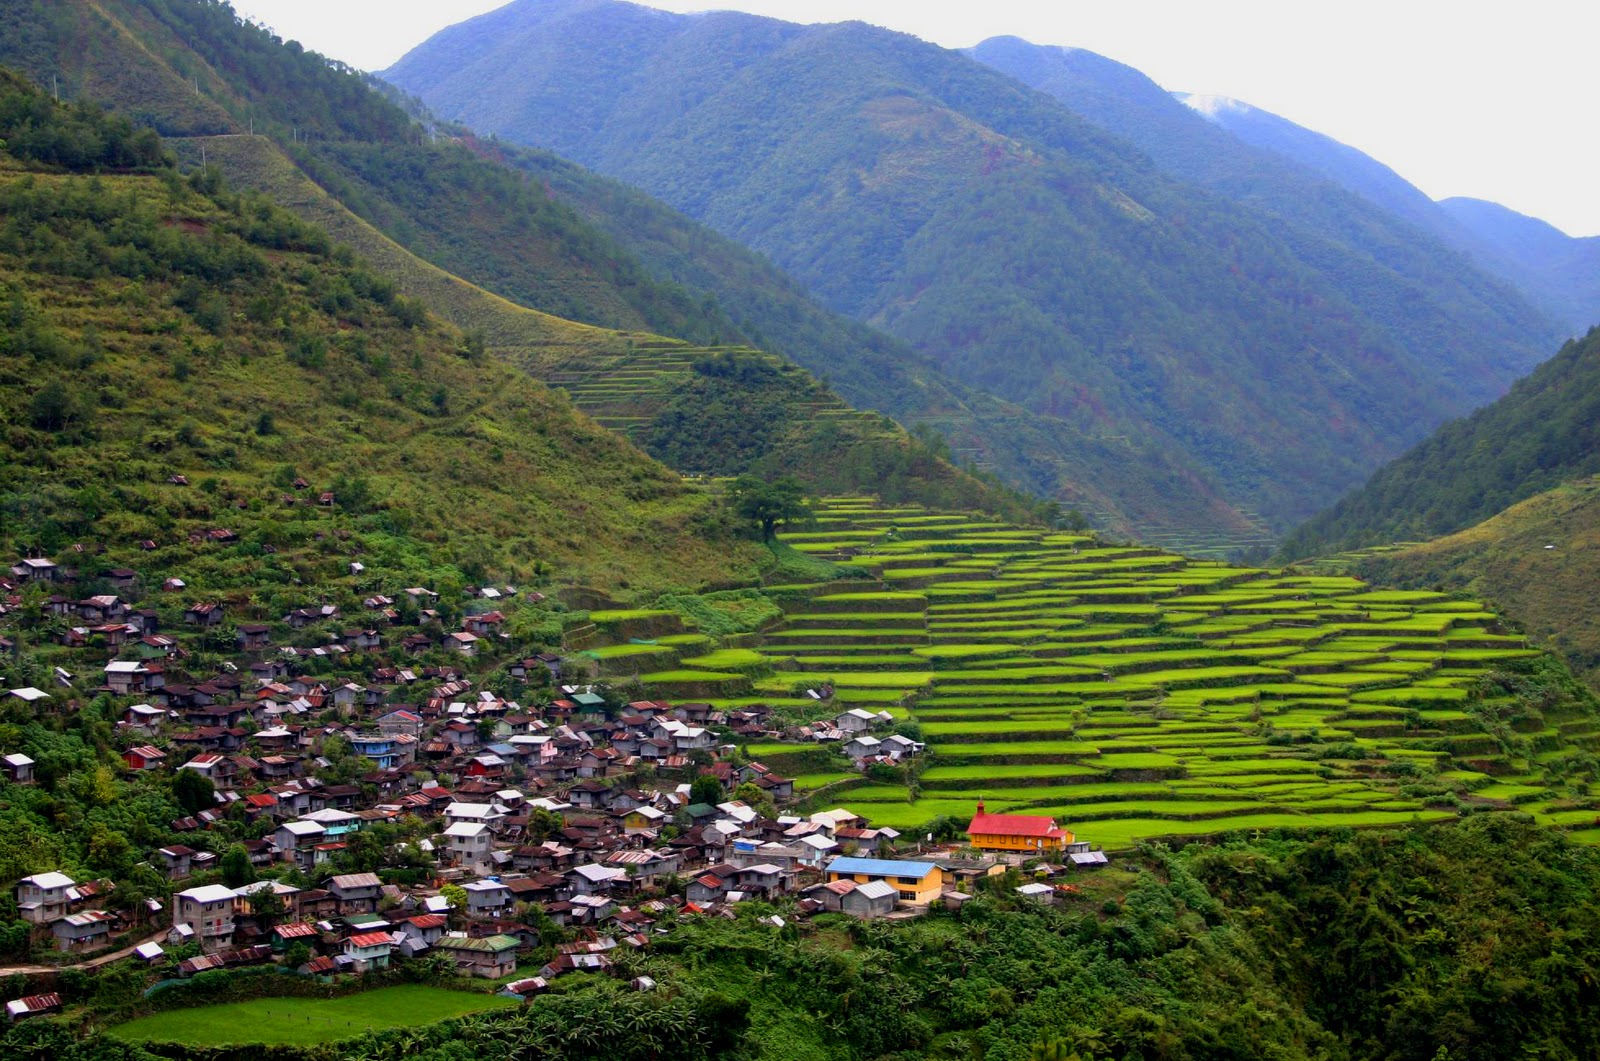 World Tour's & Travel: Ifugao, another National Cultural Treasure